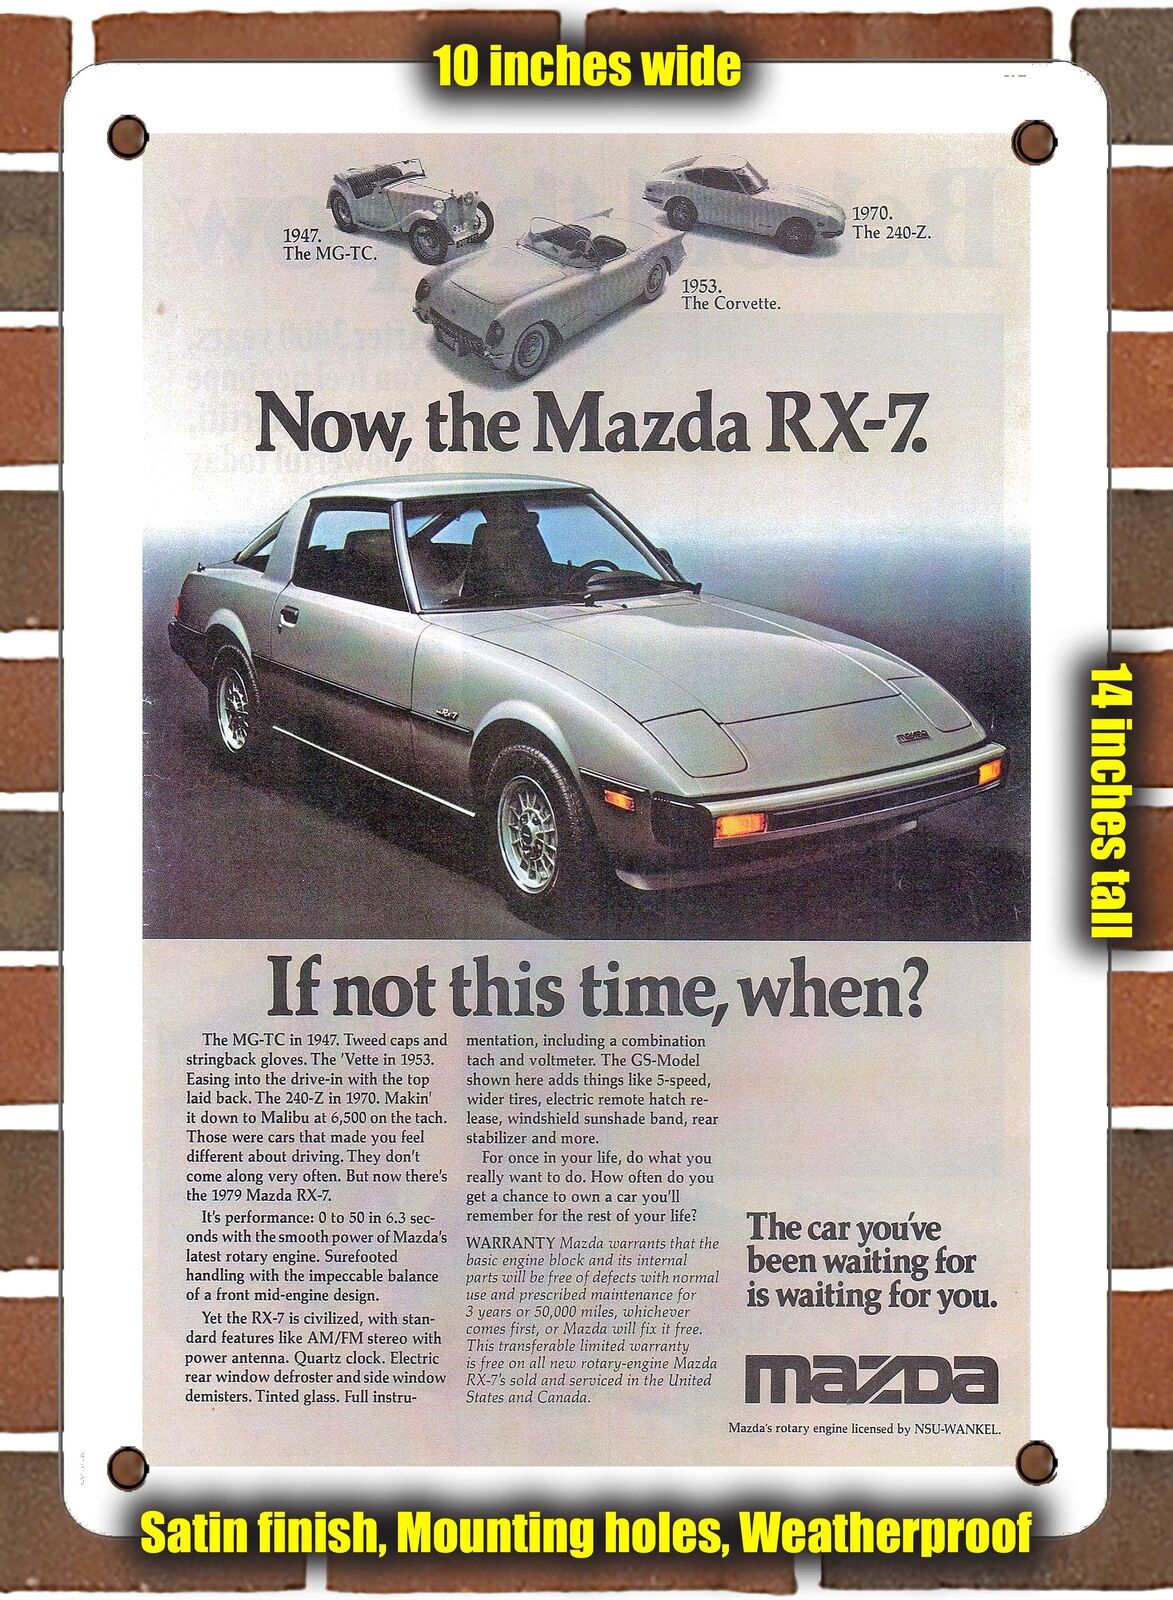 METAL SIGN - 1979 Mazda RX 7 If not this time when - 10x14 Inches